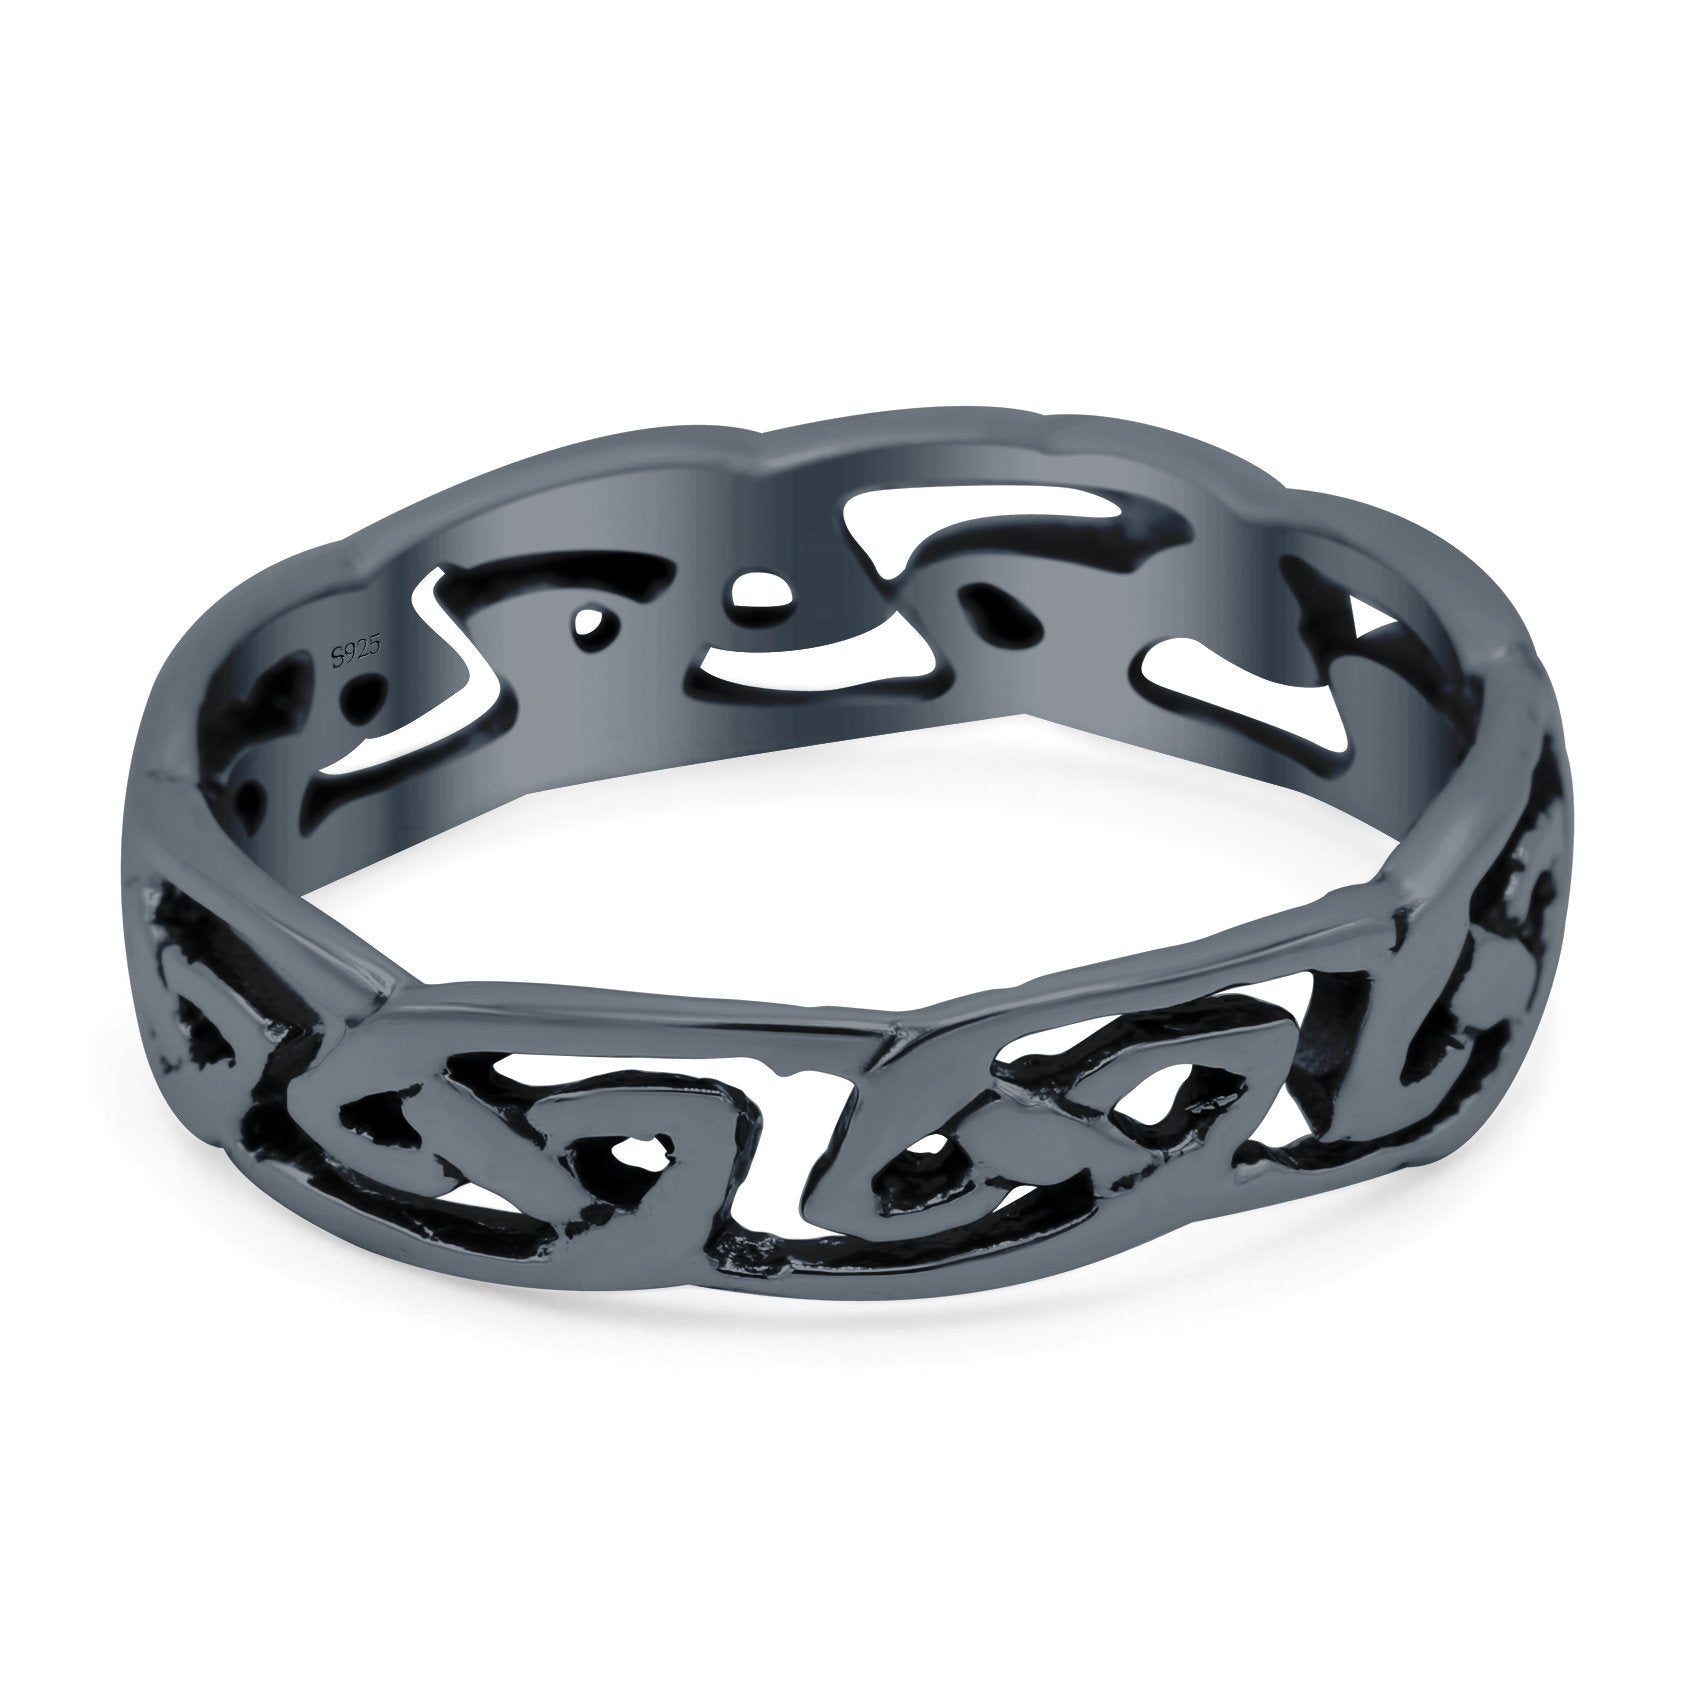 Celtic Ring Oxidized Band Solid 925 Sterling Silver Thumb Ring (5mm)